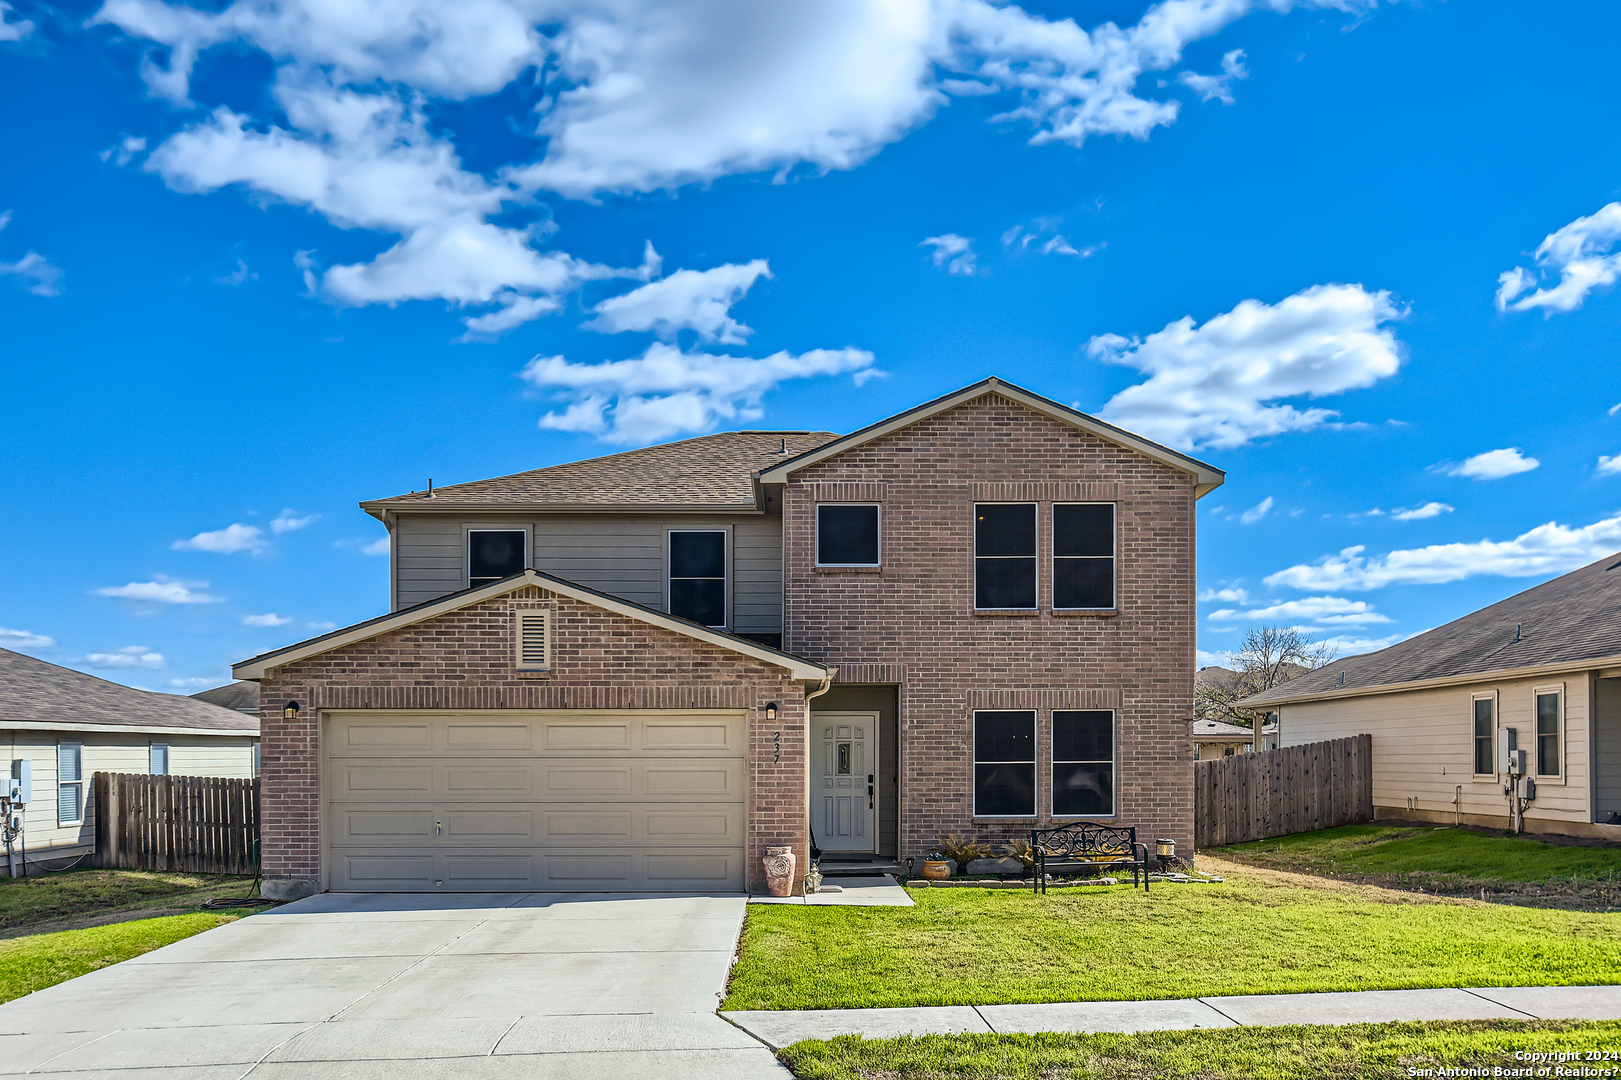 Photo of 237 Willow Wy in Cibolo, TX